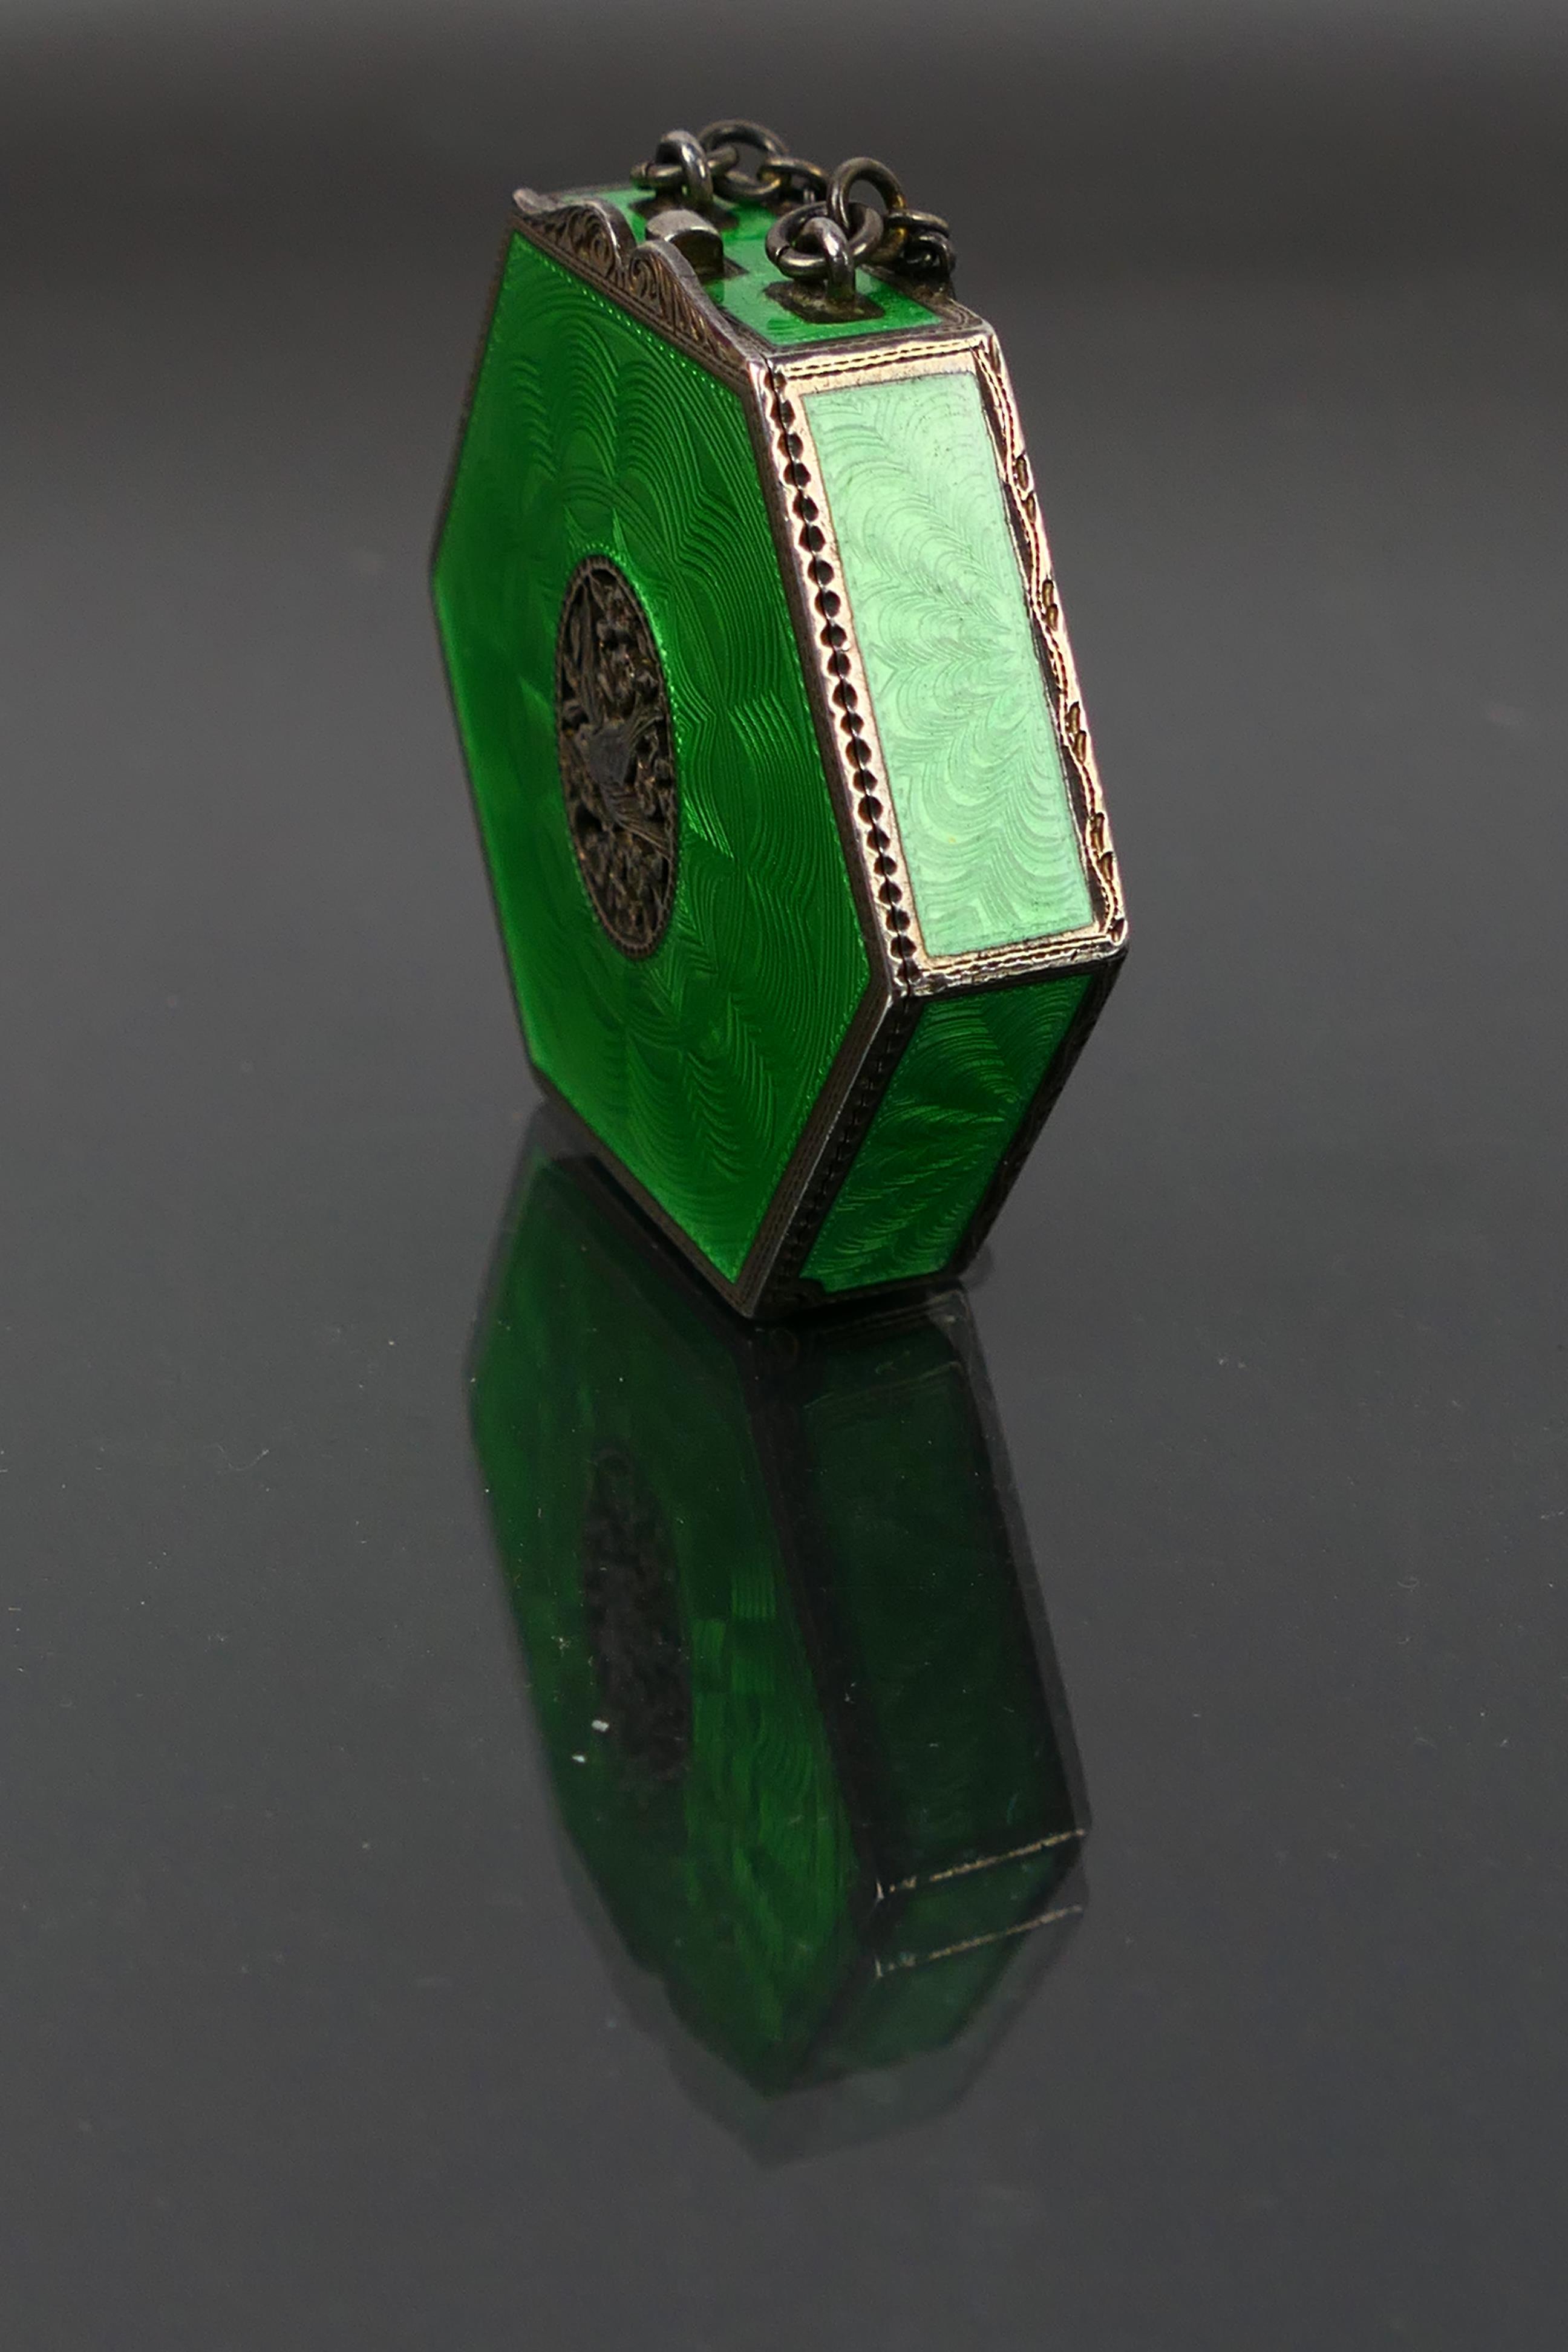 A Sterling Silver and guilloche enamel hexagonal powder compact with green enamel on all sides and - Image 3 of 12